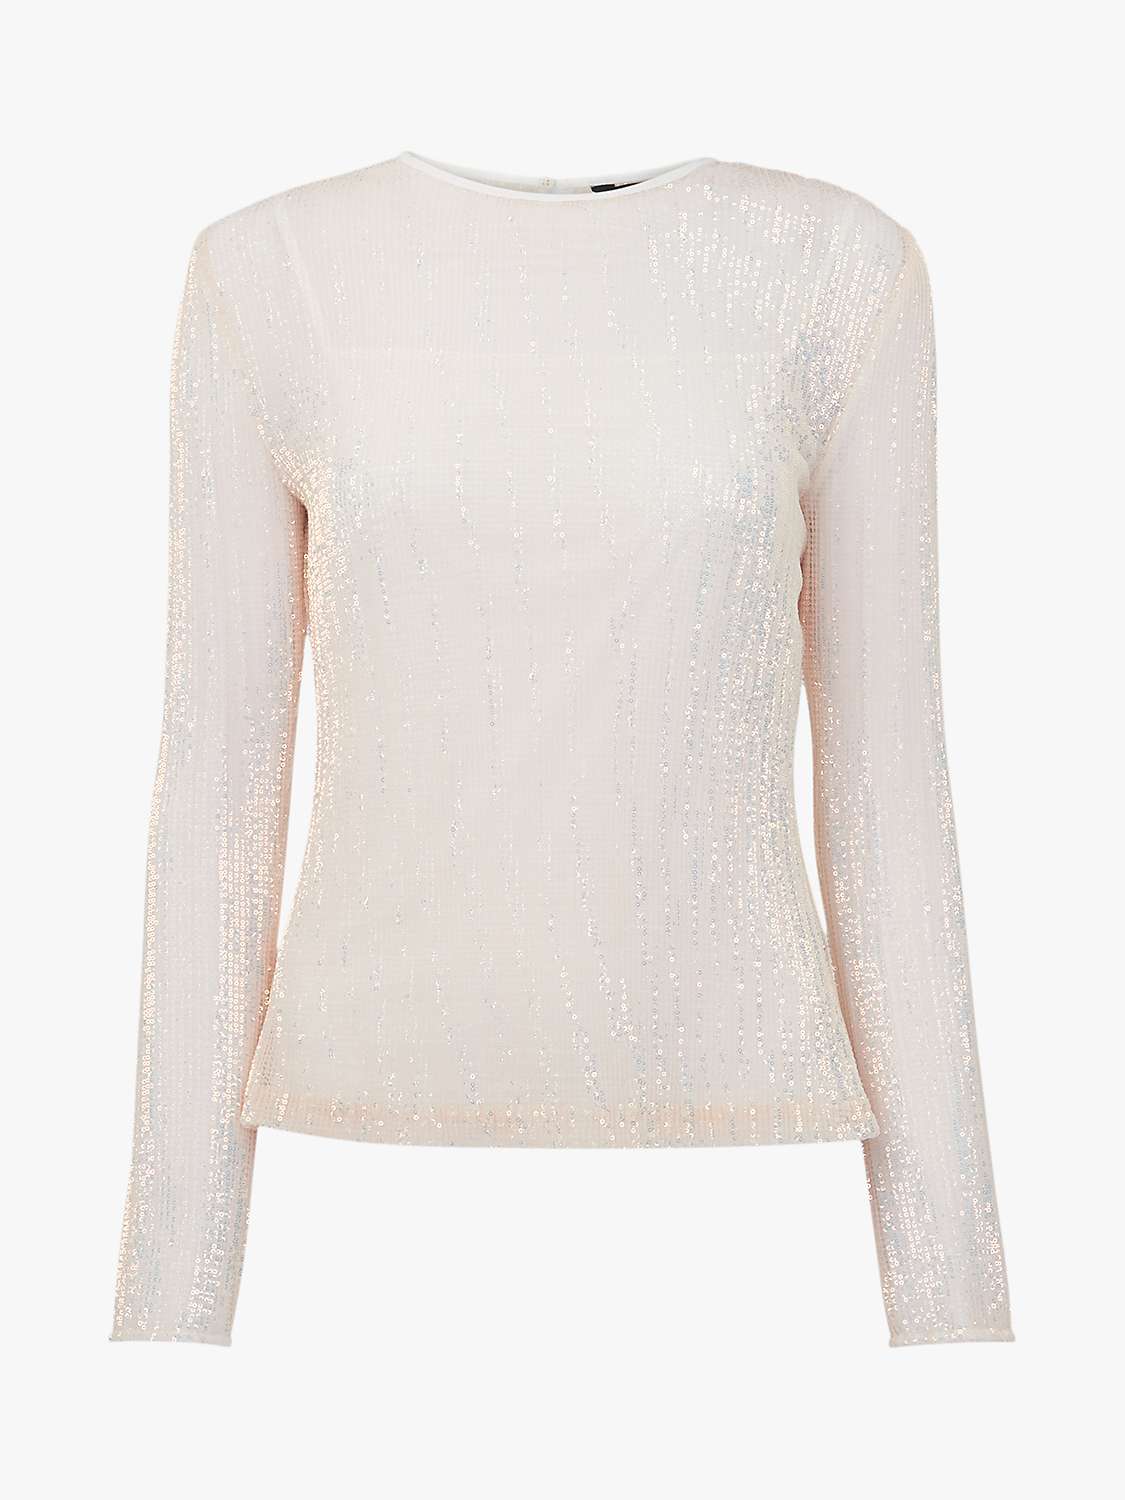 Buy Whistles Sarai Sequin Top, Pale Pink Online at johnlewis.com